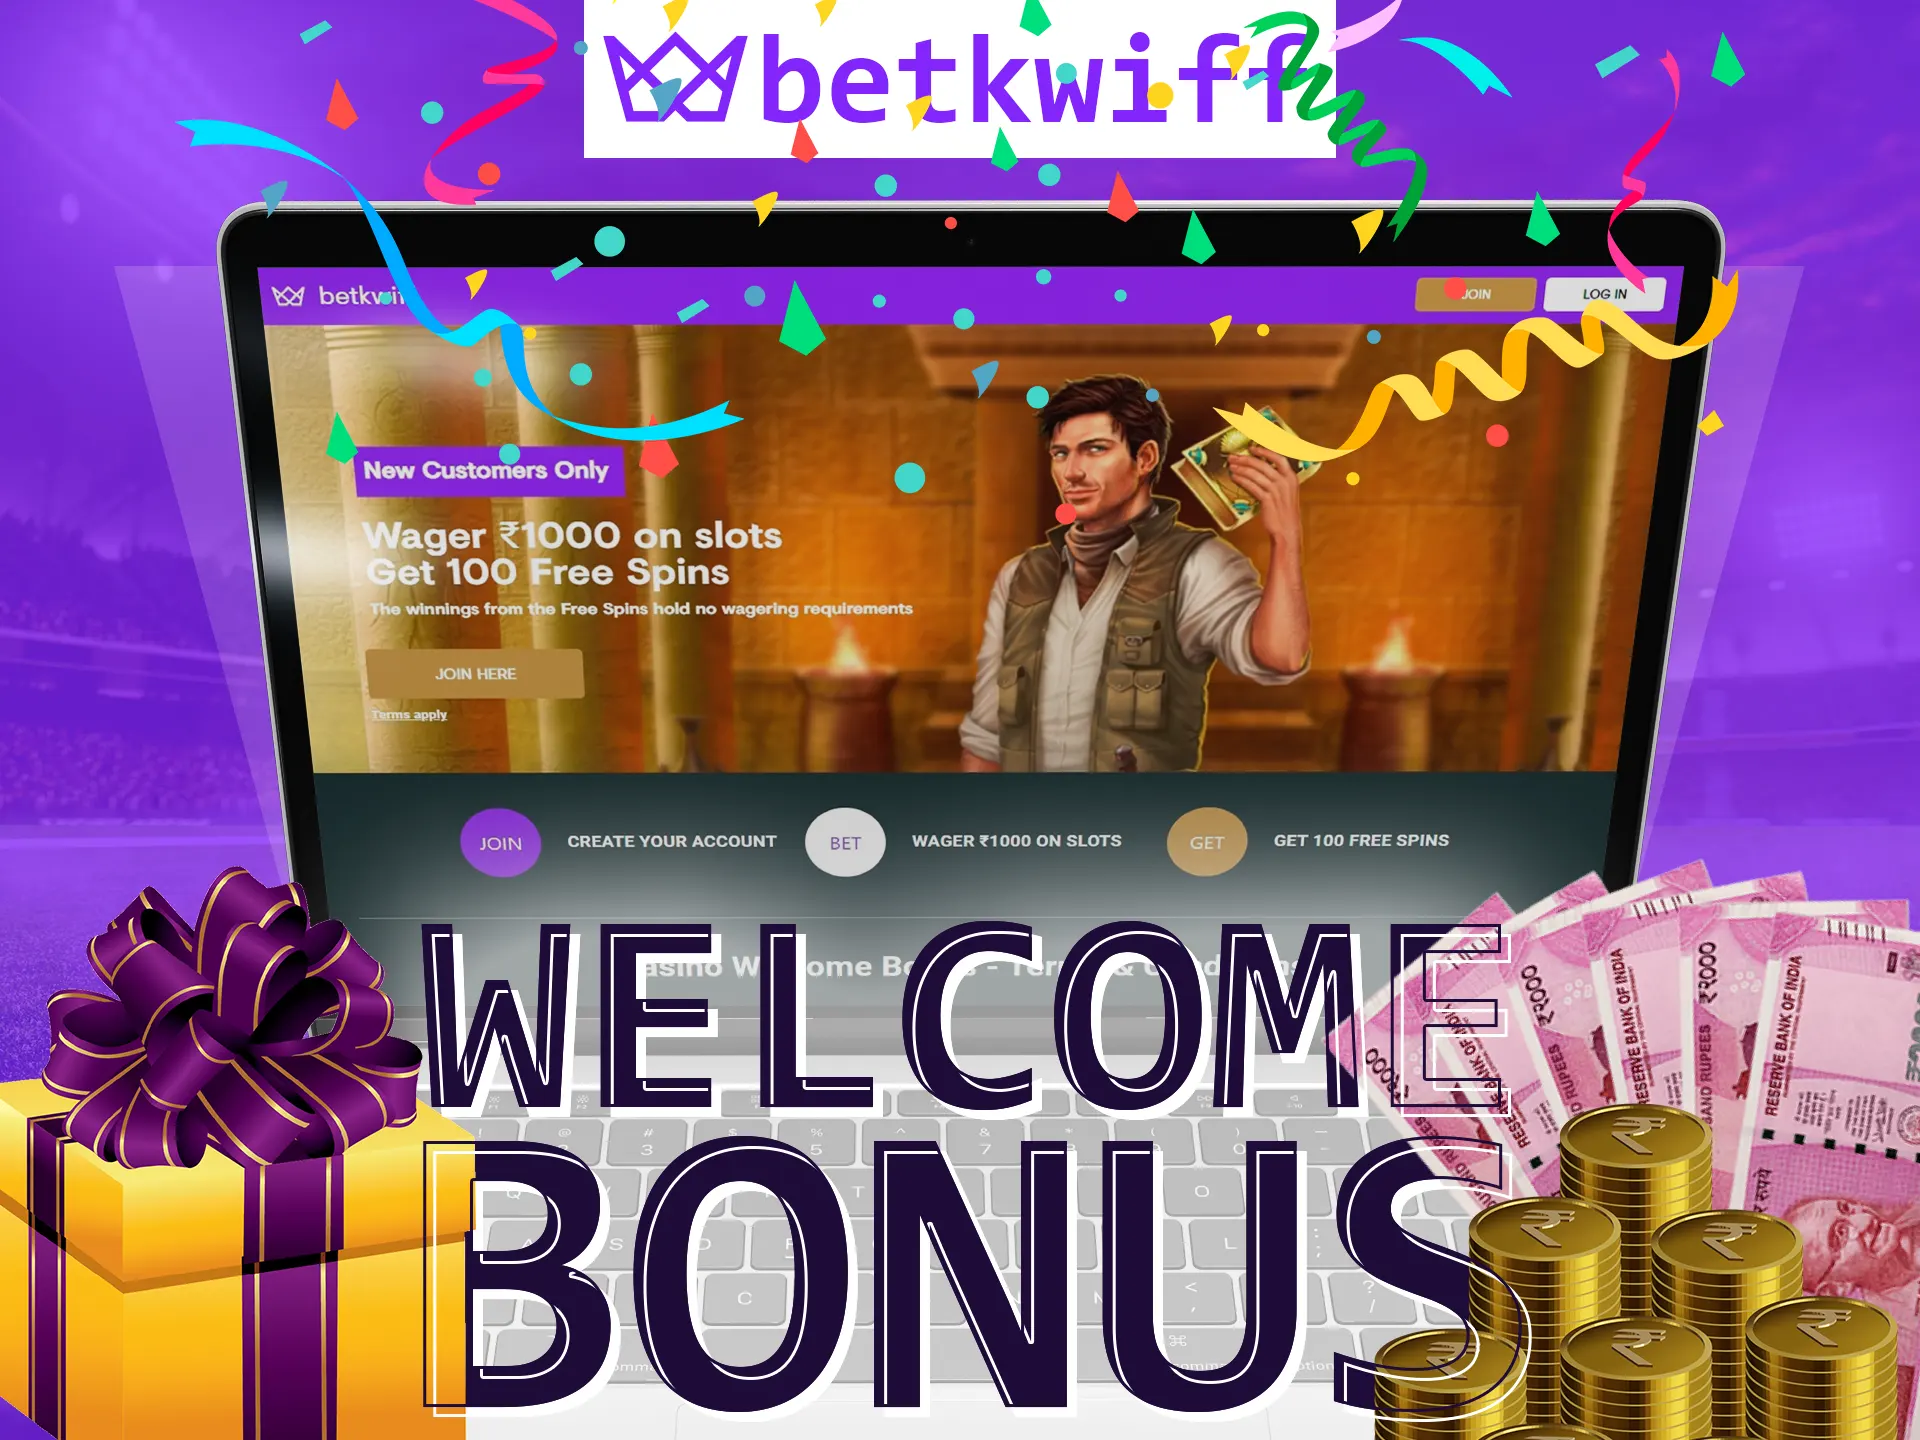 At Betkwiff, get your special welcome bonus.